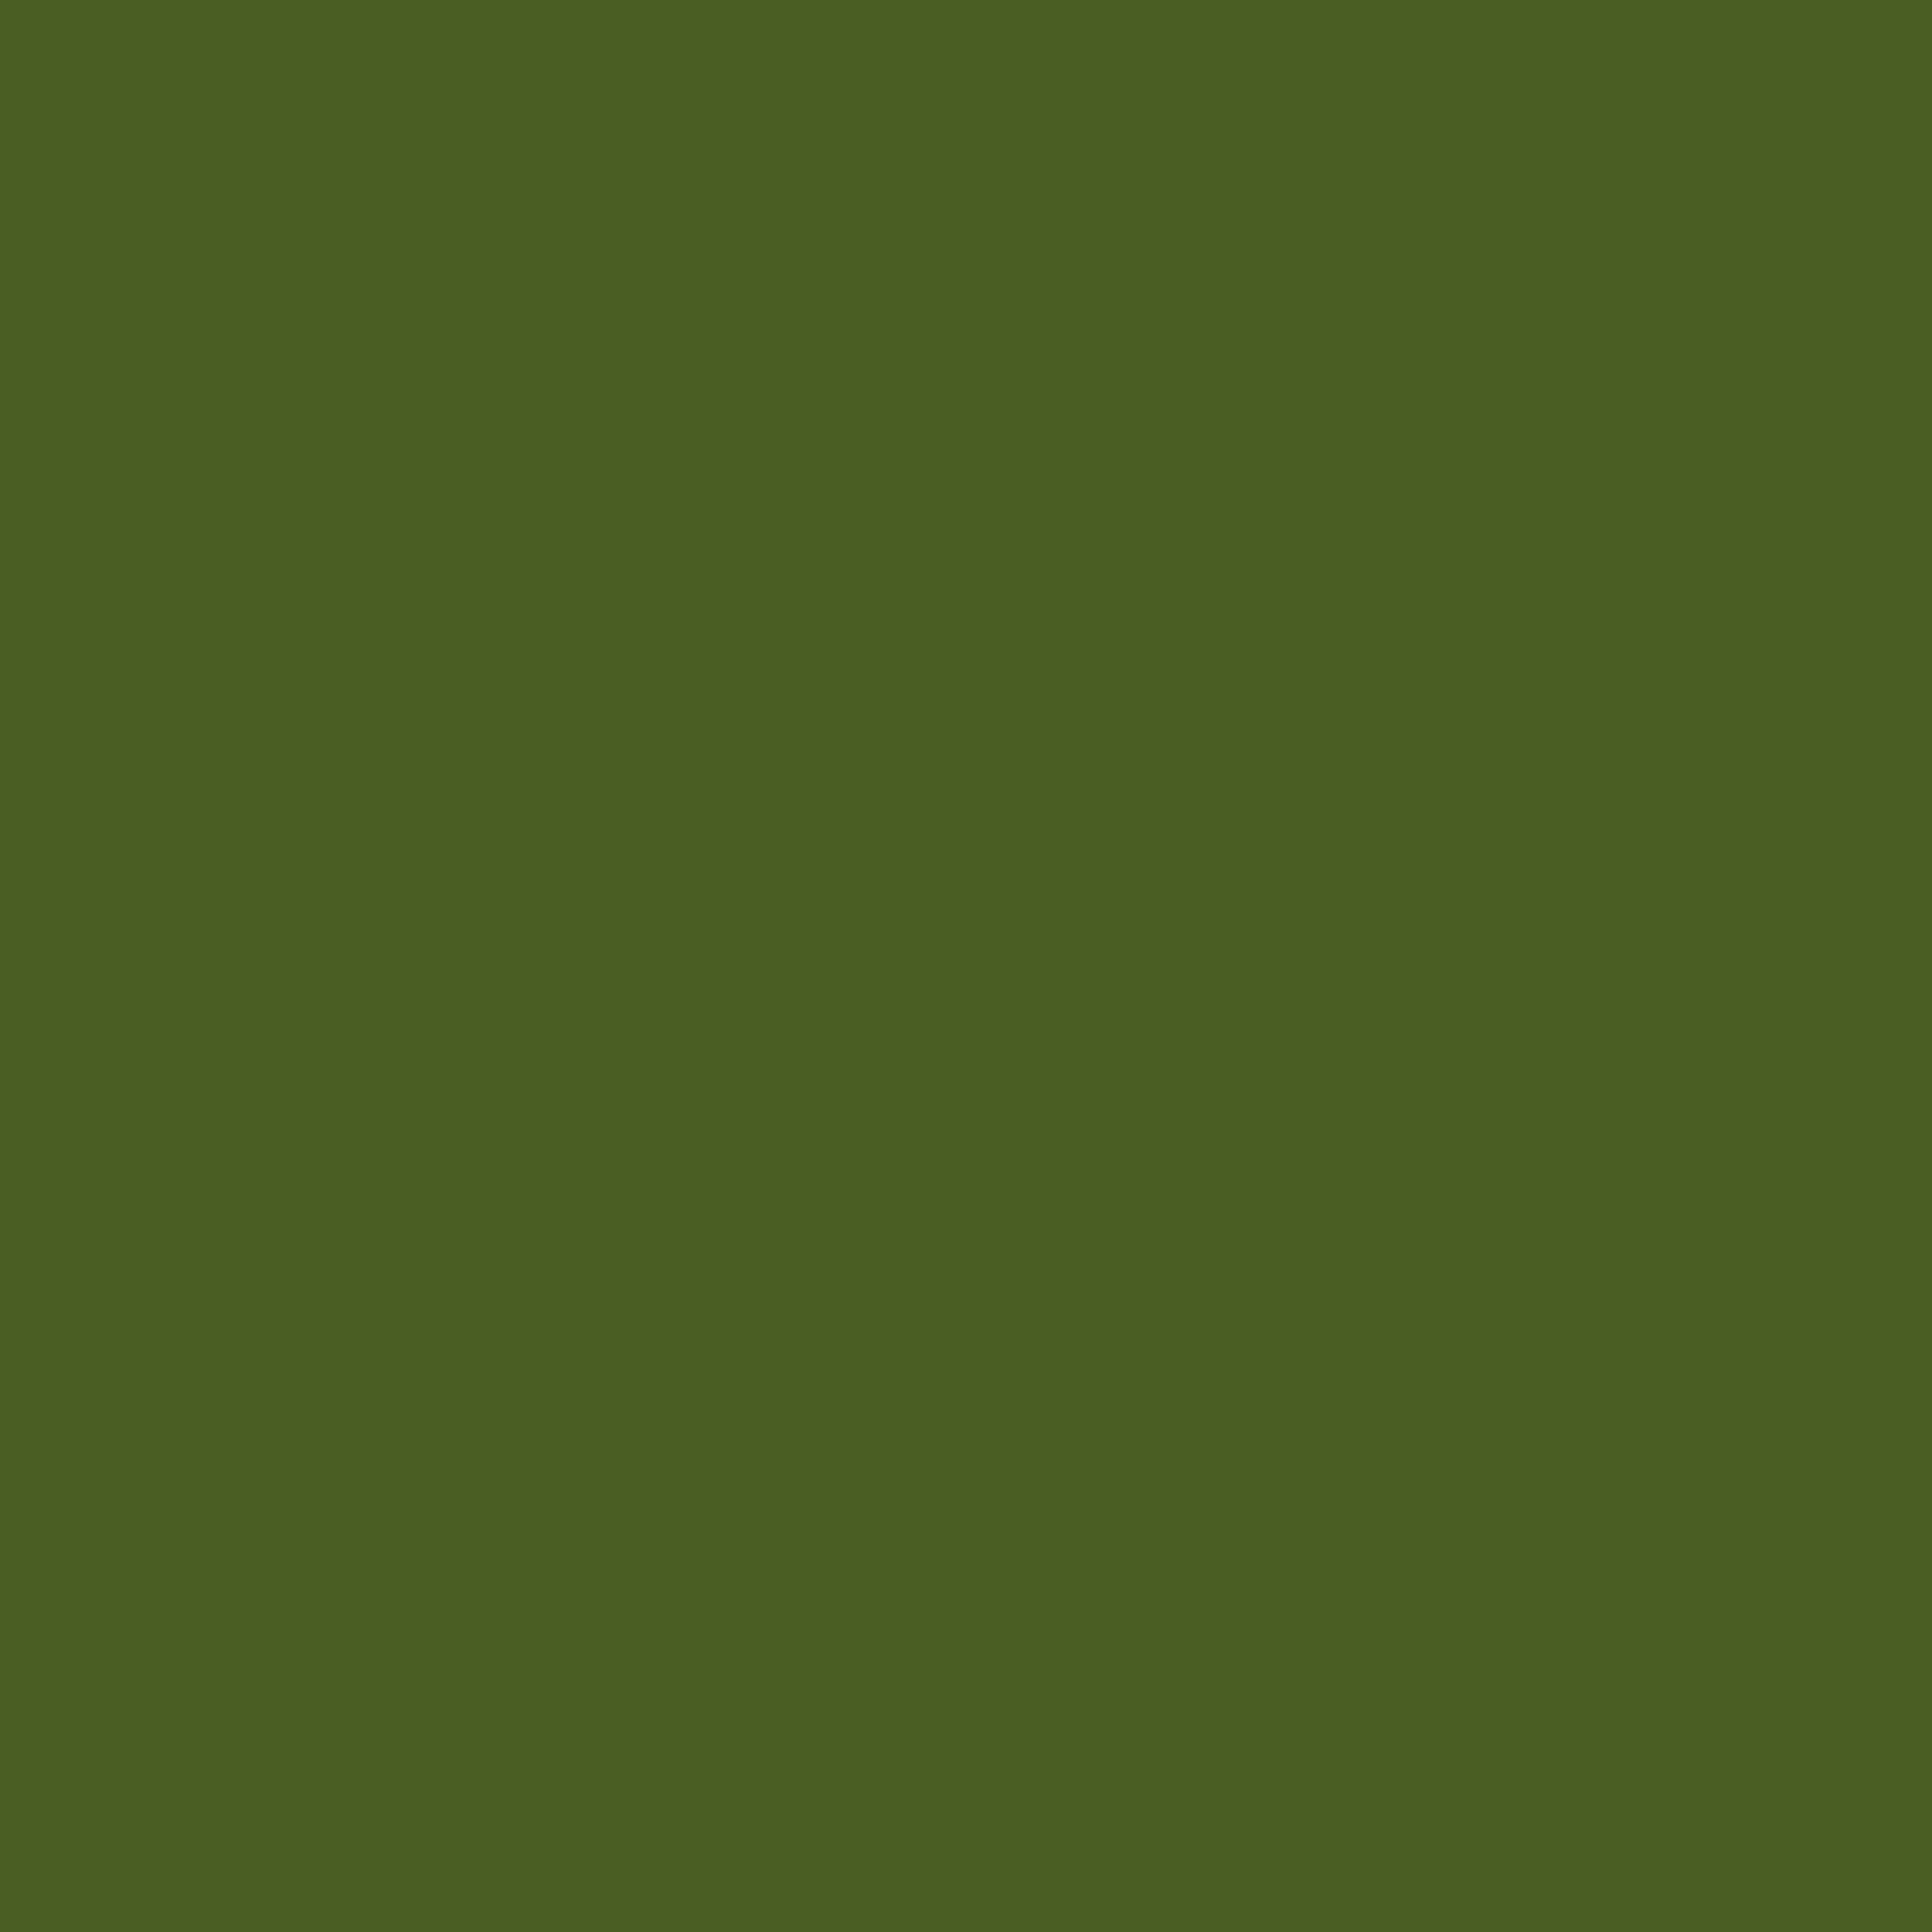 2732x2732 Dark Moss Green Solid Color Background